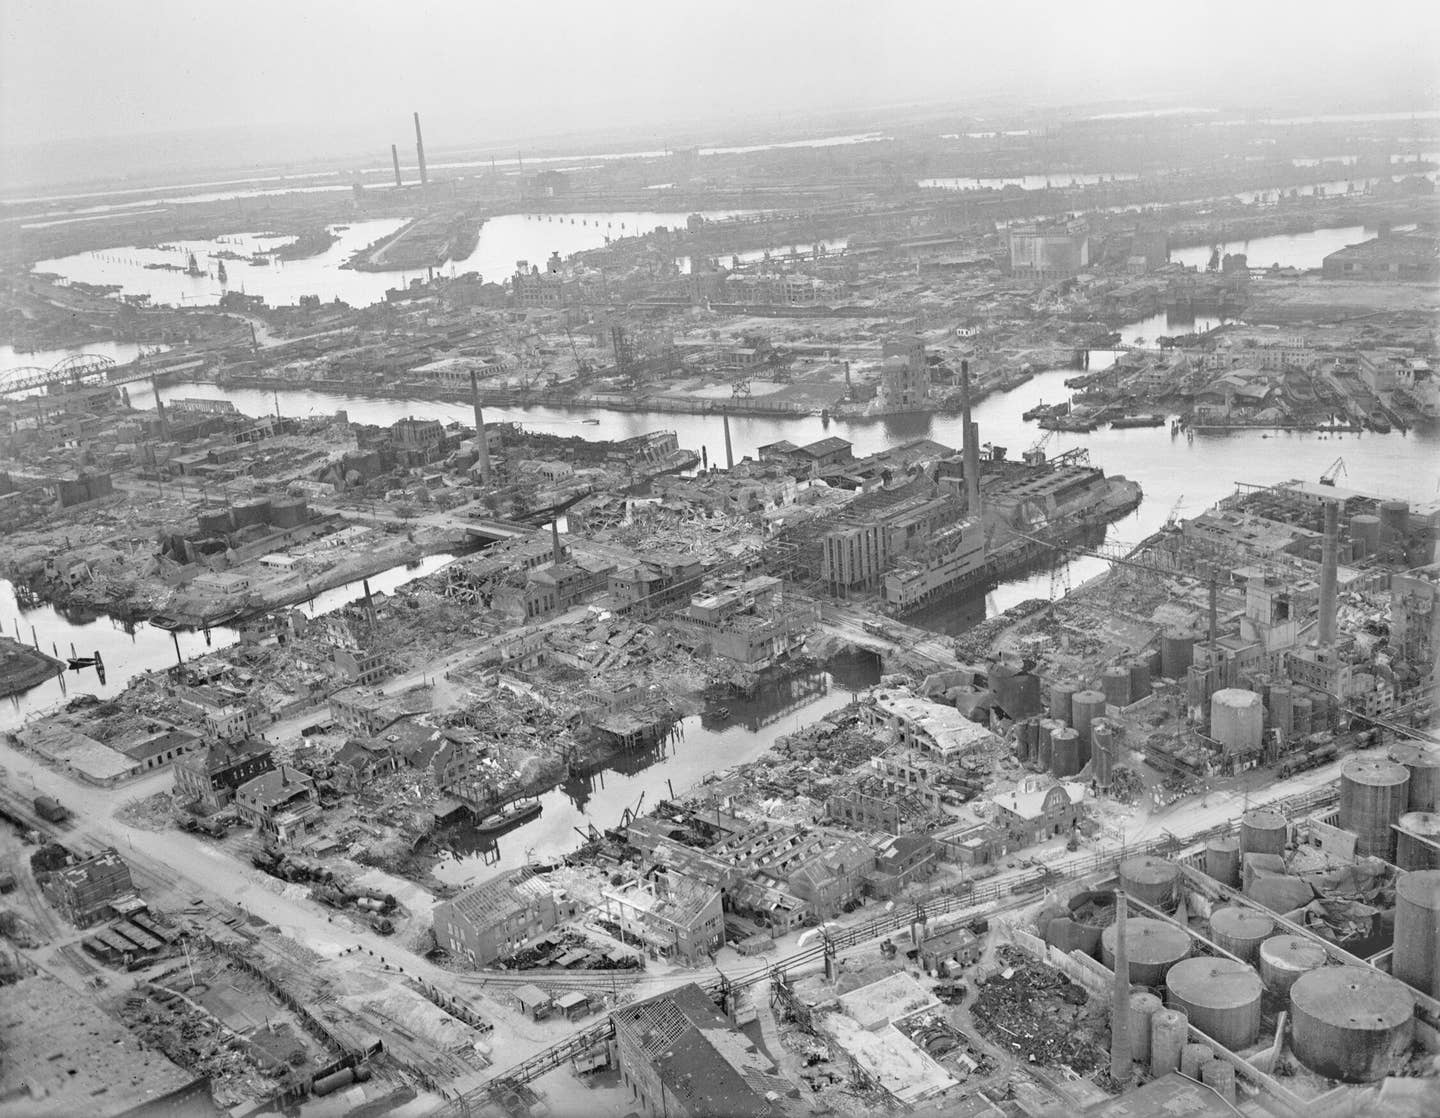 An oblique aerial view of severely damaged docks in the Steinwerder district of Hamburg, looking southwest from over the Rive Elbe. The area was subjected to repeated attacks by Bomber Command and USAAF raids. <em>Crown Copyright</em>